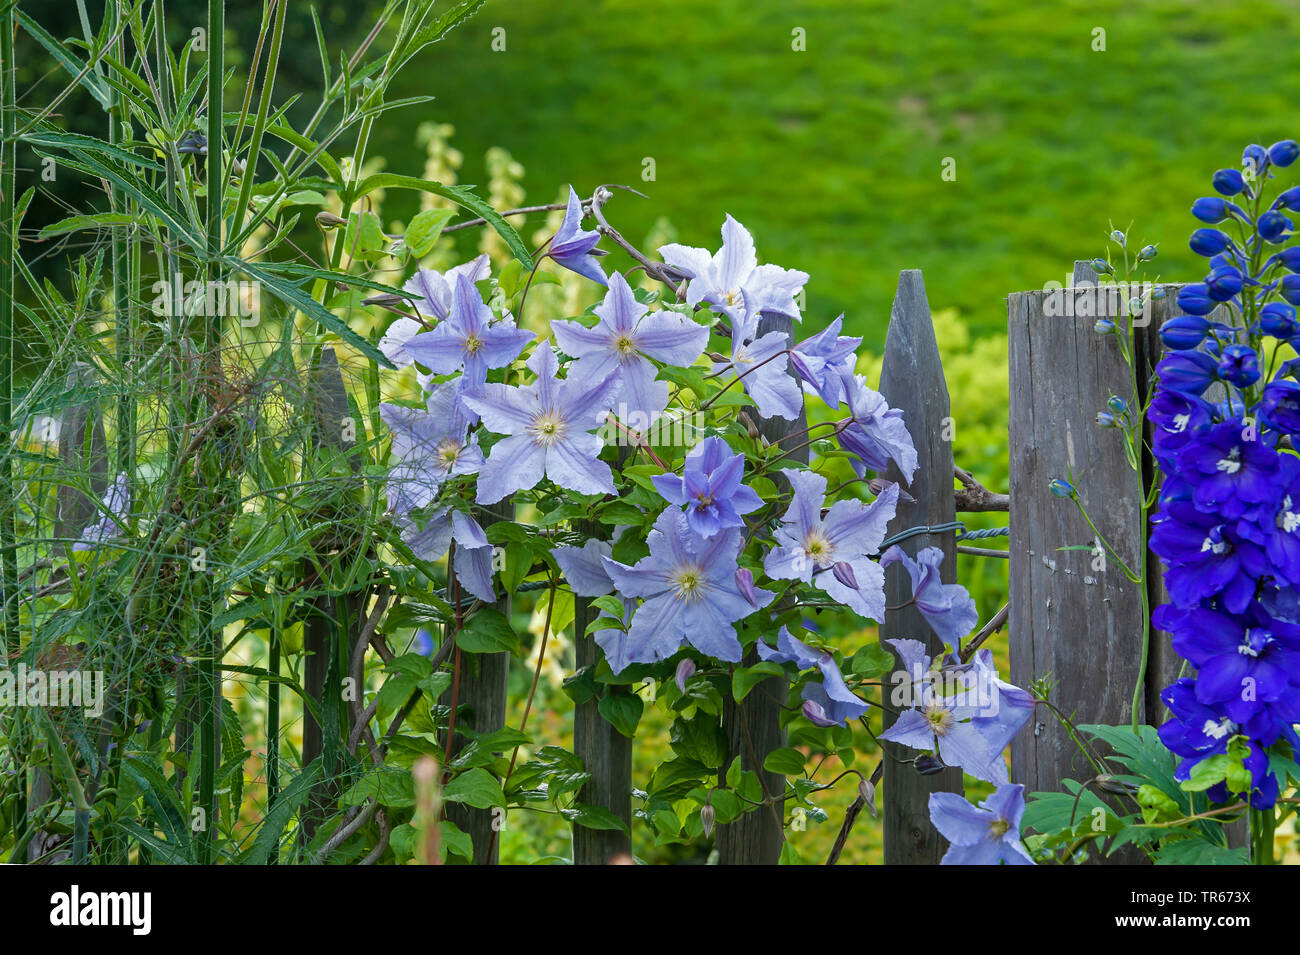 Clematis (Clematis 'Blekitny Aniol', Clematis Blekitny Aniol), blooming at a fence, cultivar Blekitny Aniol, Netherlands Stock Photo